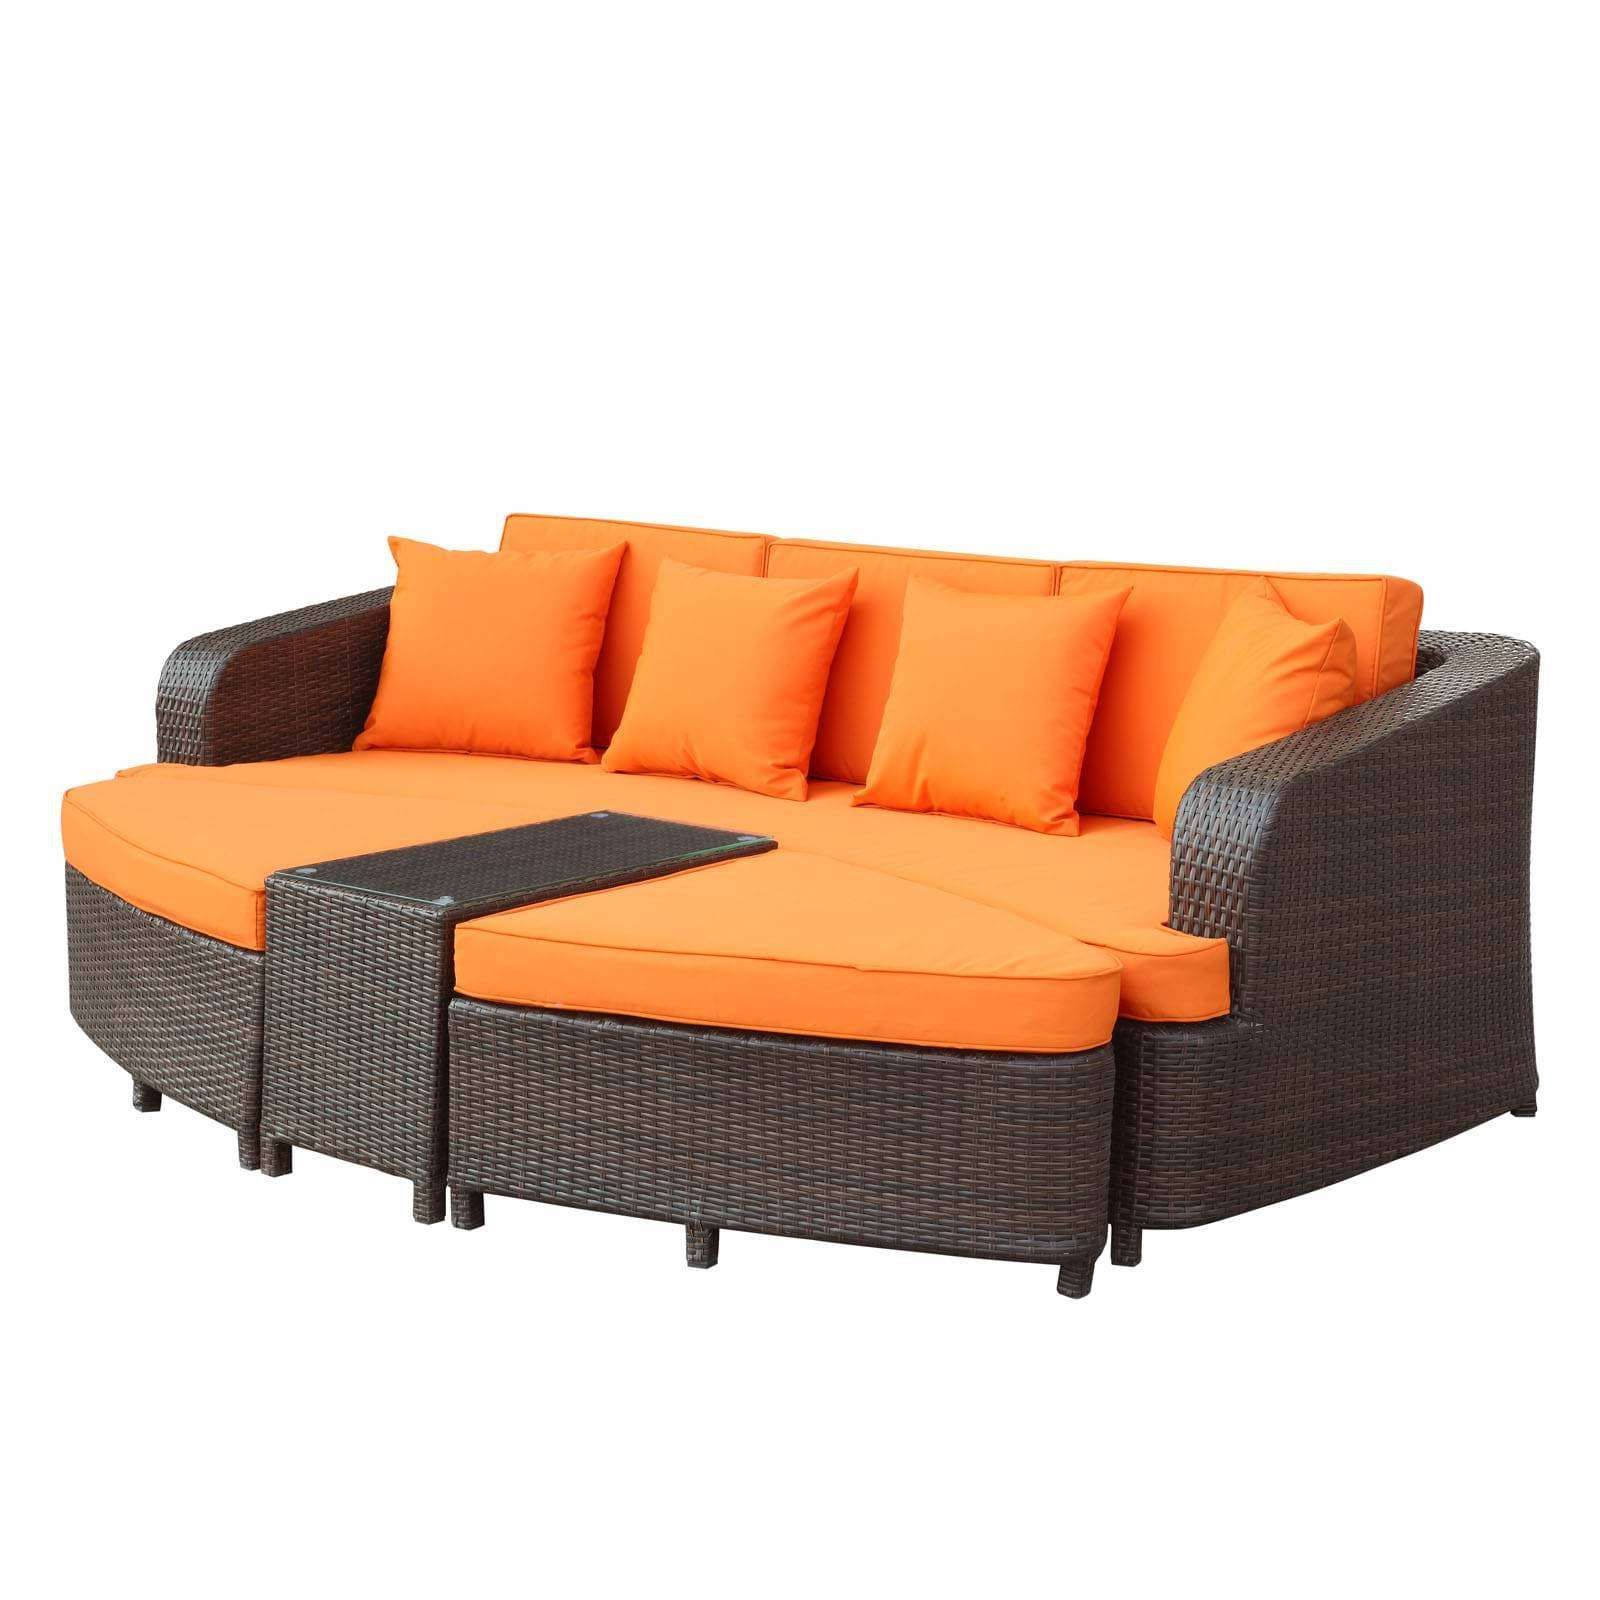 Most Current Modterior :: Outdoor :: Sectional Sets :: Monterey 4 Piece Outdoor Intended For 4 Piece Outdoor Sectional Patio Sets (View 8 of 15)